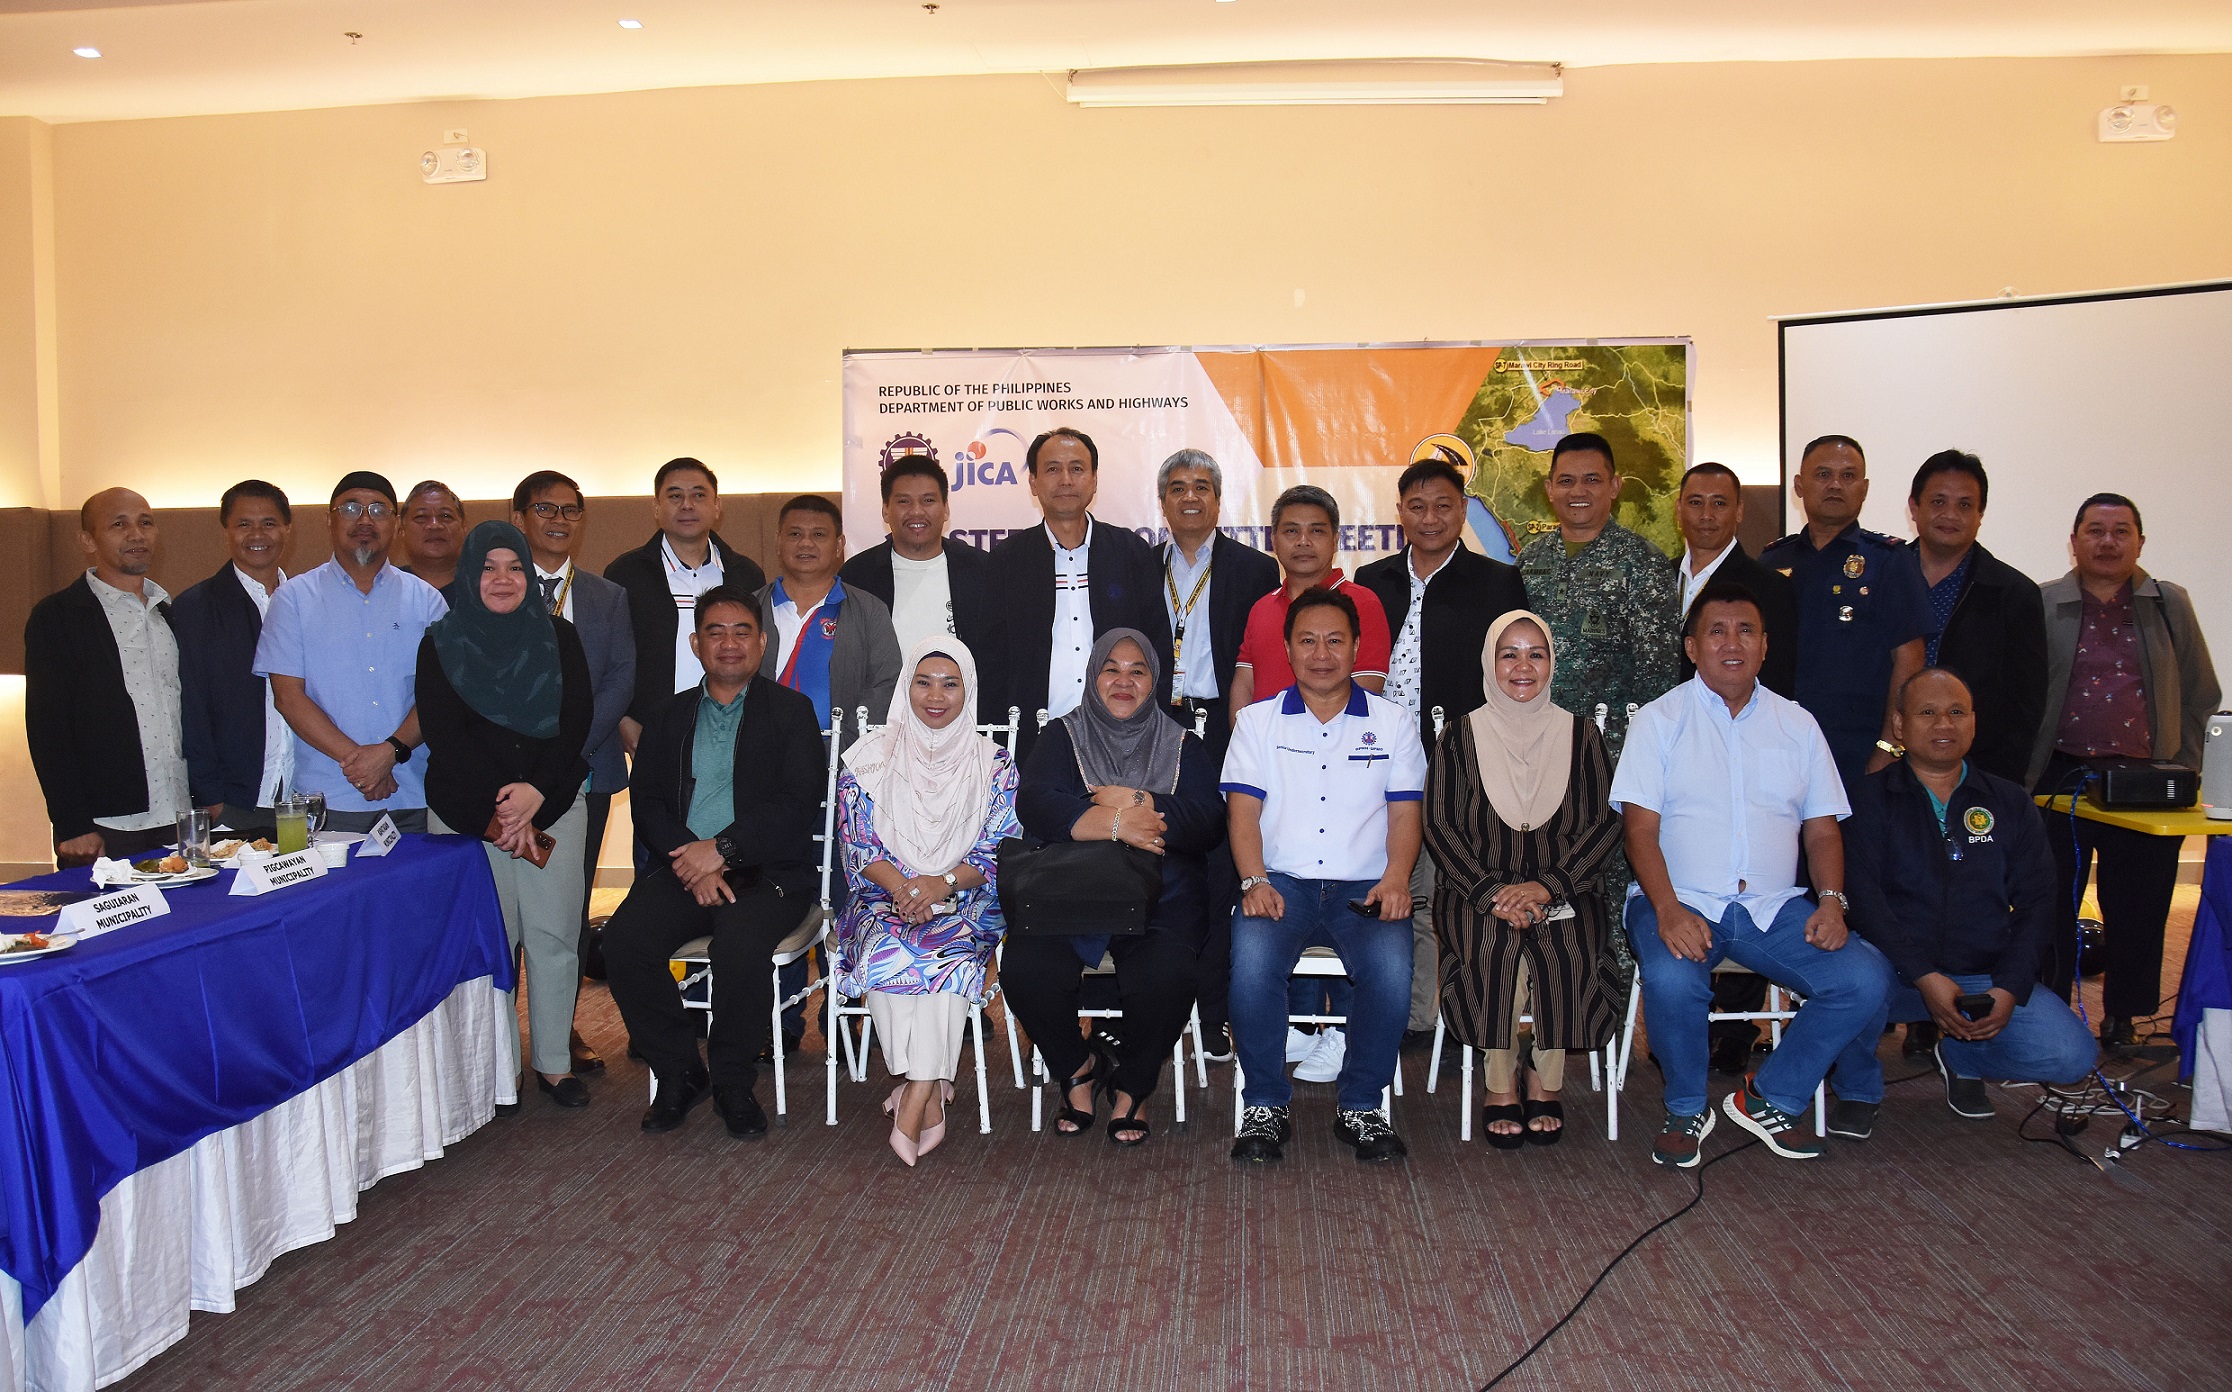 DPWH CONDUCTS STAKEHOLDERS’ MEETING FOR JICA-ASSISTED ROAD NETWORK DEVELOPMENT PROJECT IN MINDANAO